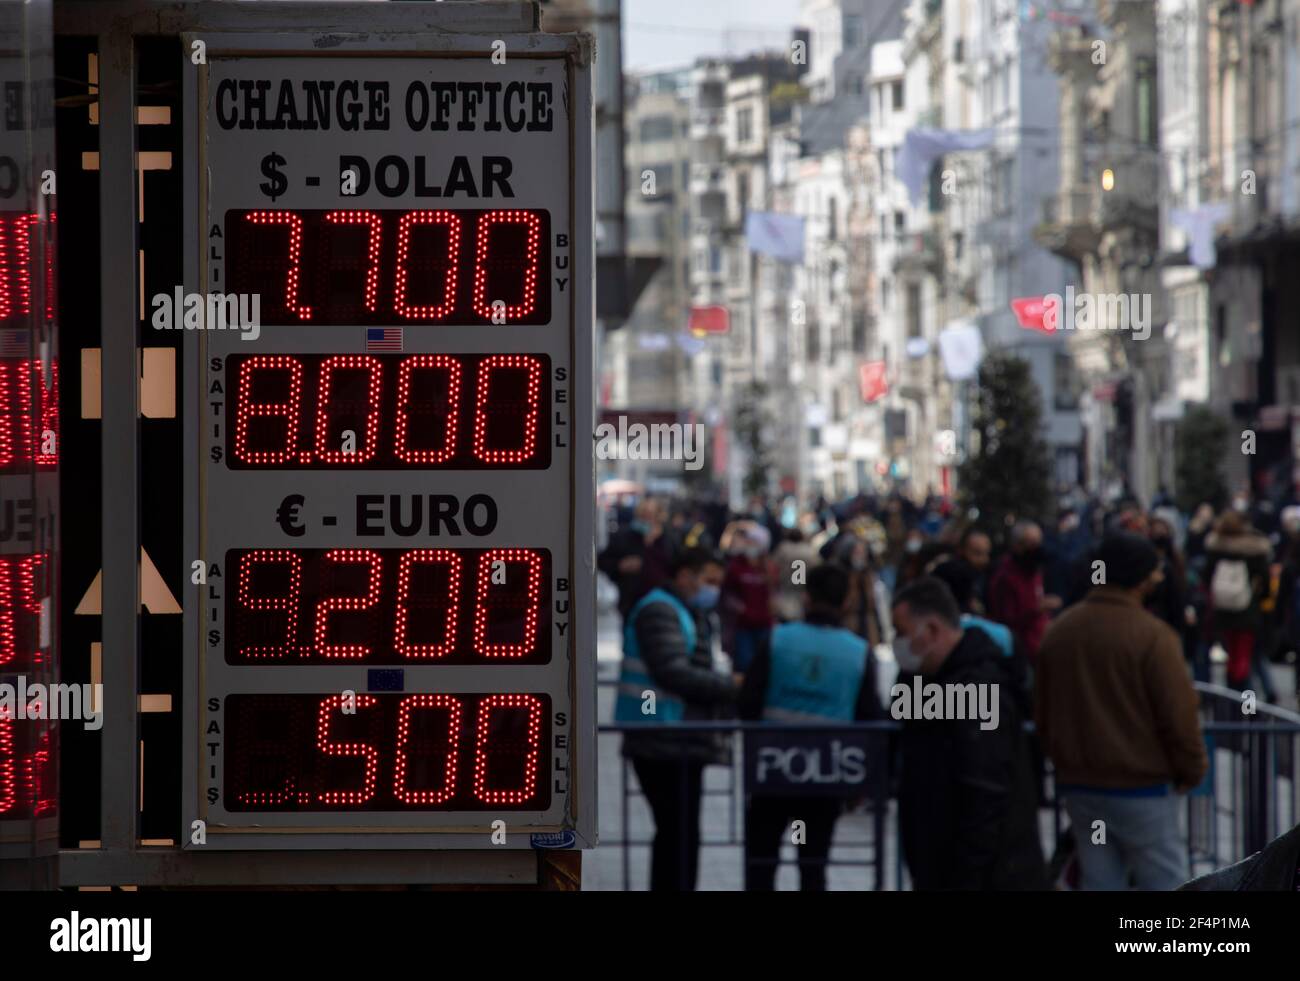 (210322) -- ISTANBUL, March 22, 2021 (Xinhua) -- A currency exchange's electronic screen shows foreign exchange rates in Istanbul, Turkey, on March 22, 2021. Turkey's currency plunged around 11 percent on Monday after Turkish President Recep Tayyip Erdogan fired the central bank governor and appointed a critic of high interest rates, a move sparking turbulence in markets. Turkish lira was fluctuating at 8.02 against the U.S. dollar in Monday's morning trading, a sharp decline from Friday's closing level of 7.22, while the Turkish currency was also down 11 percent against the euro. (Photo by Os Stock Photo